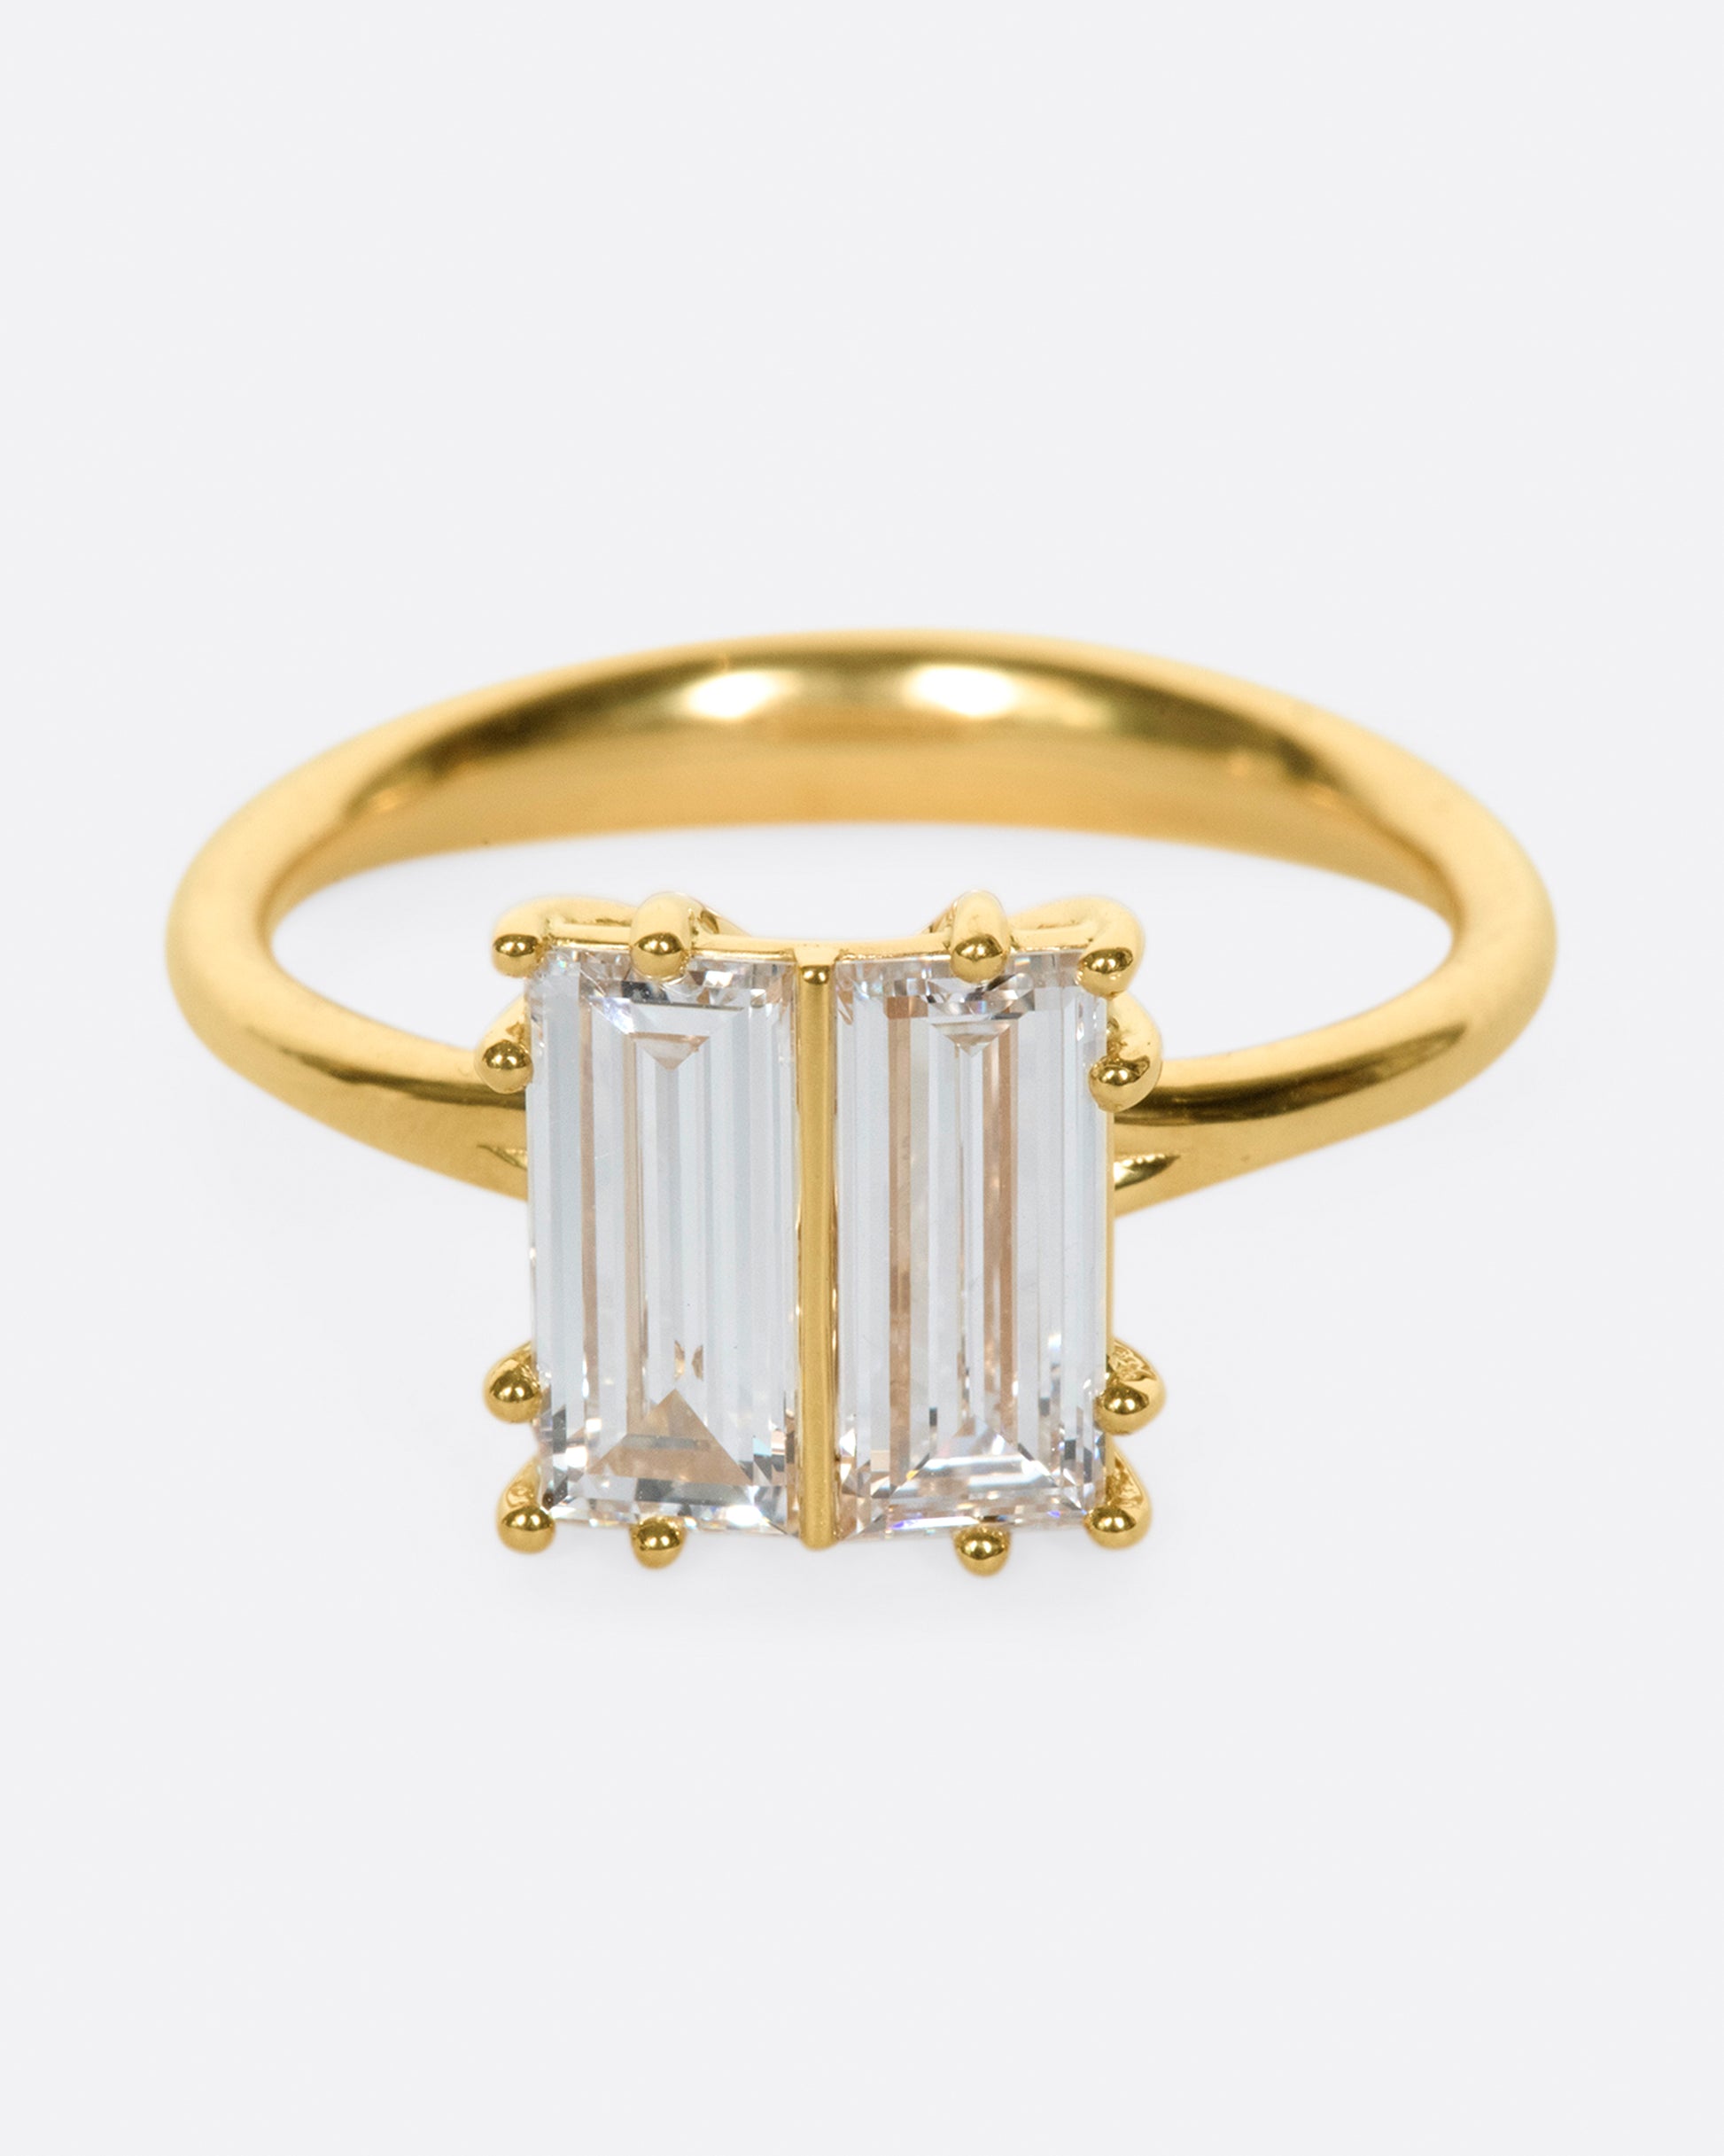 A modern Toi et Moi ring, this symmetrical style shows off two large baguette diamonds set in hand formed prong settings.